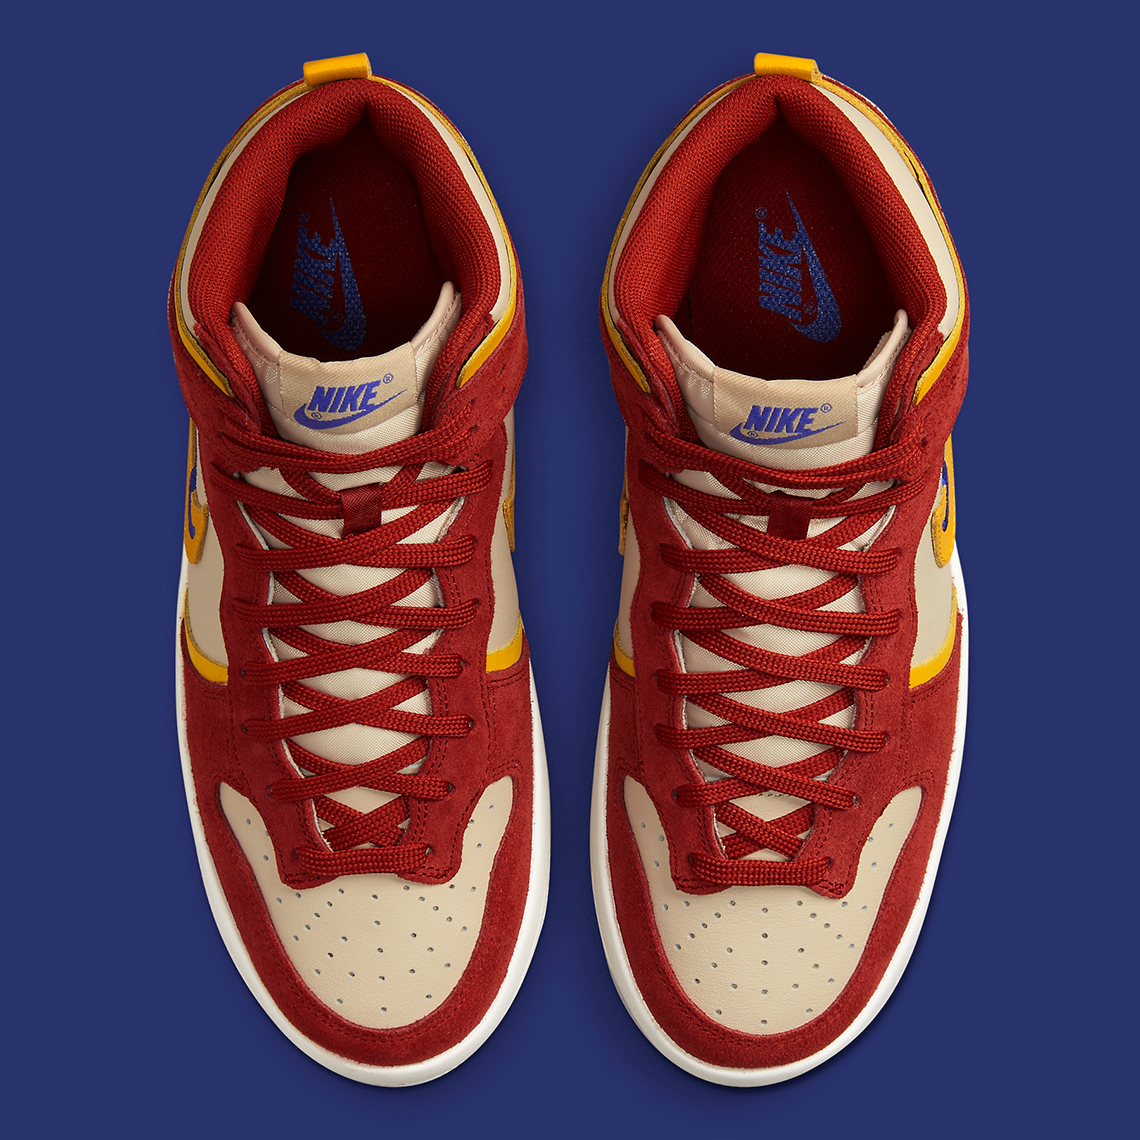 nike crops Dunk high up dh3718 600 release date 5